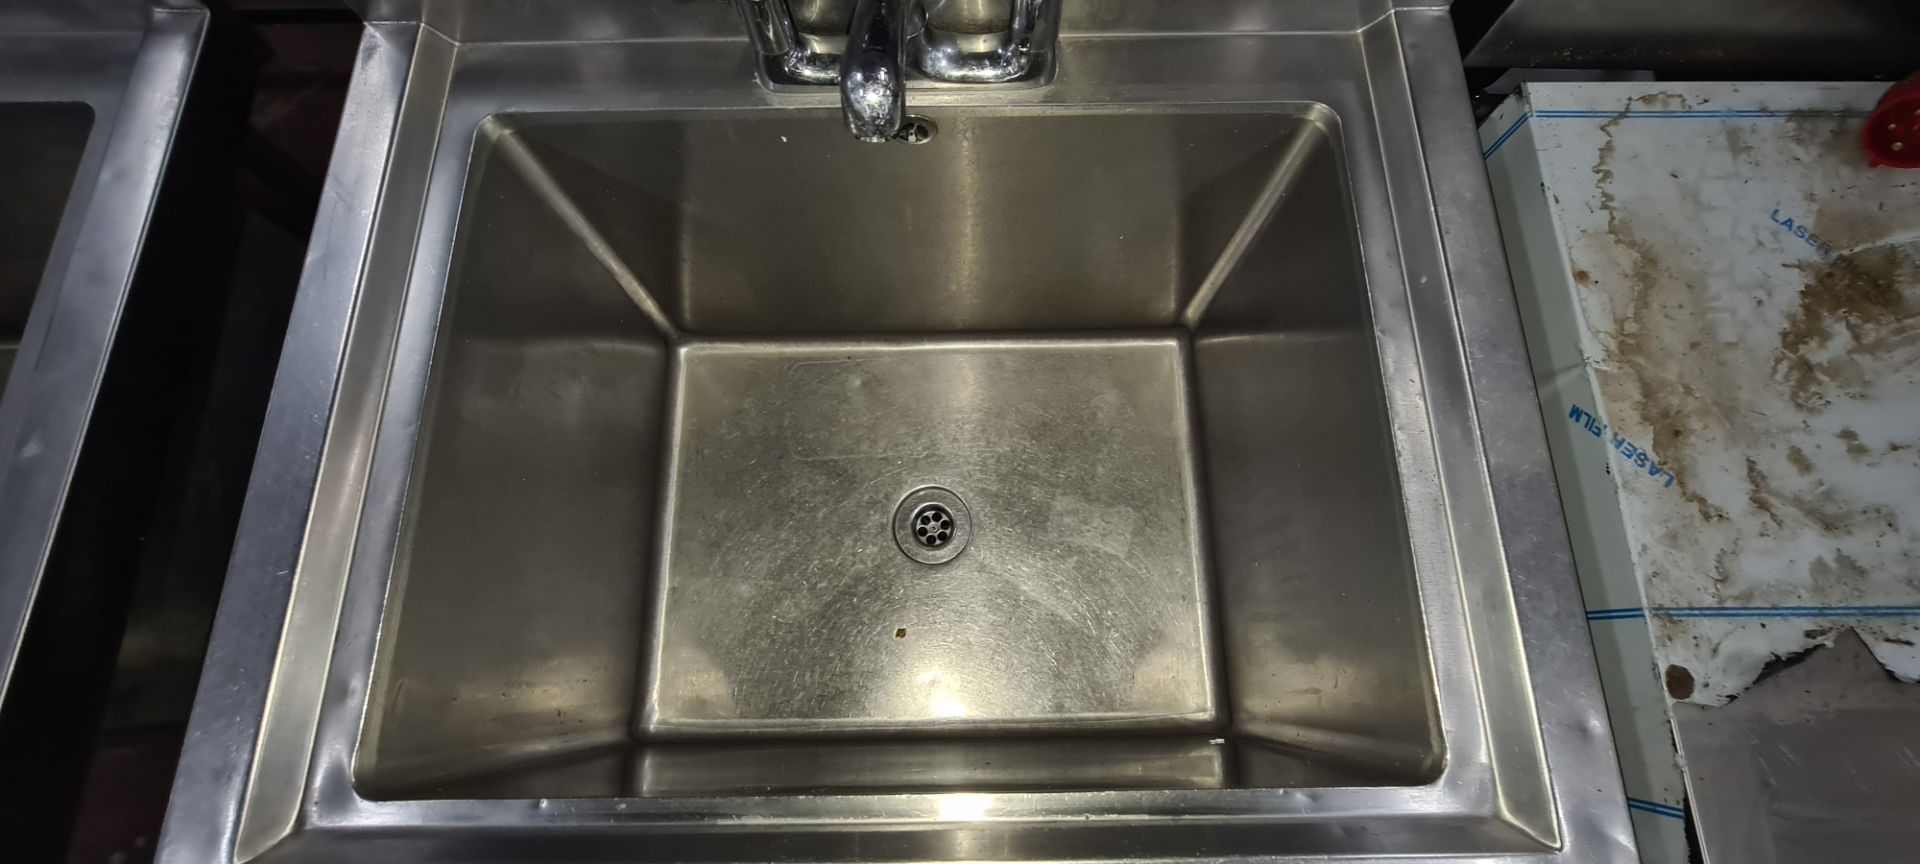 Vogue freestanding stainless steel basin with mixer tap - Image 4 of 5